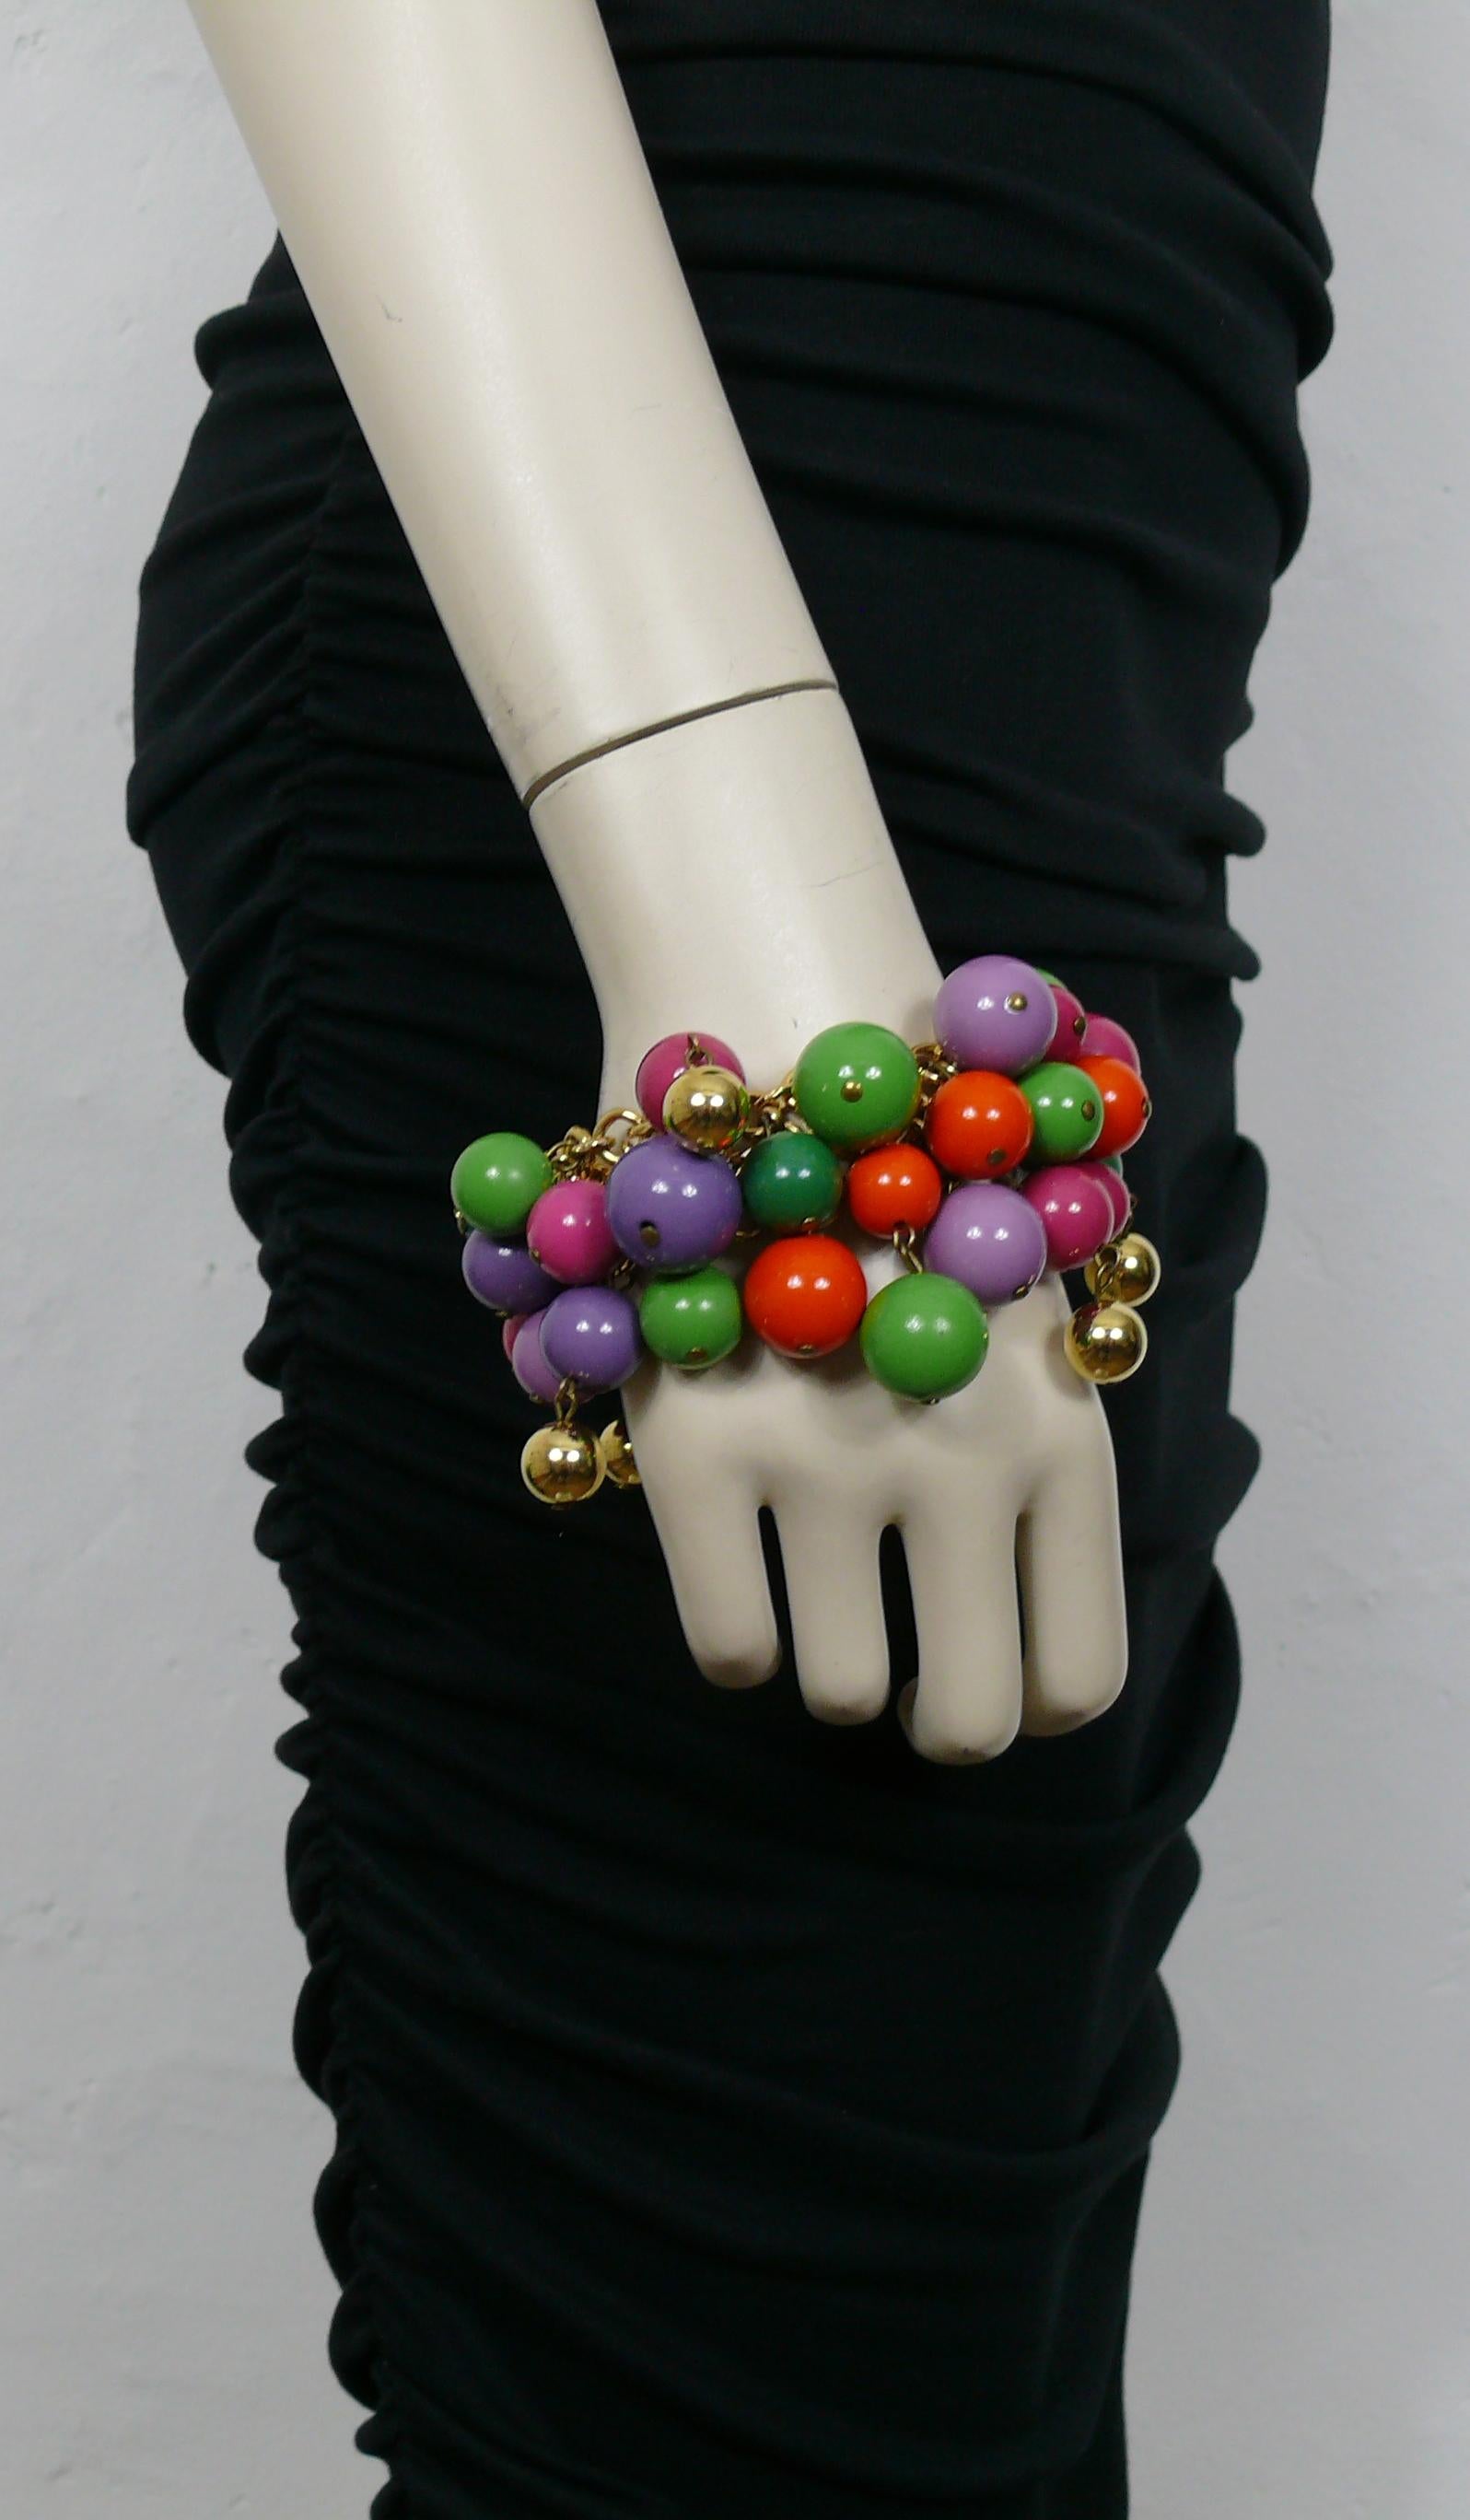 GIANNI VERSACE vintage gold tone metal chainmail link bracelet featuring a multicoloured cluster of resin beads and metal balls.

Embossed GIANNI VERSACE Made in Italy.

Indicative measurements : length approx. 18 cm (7.09 inches).

Material :  Gold